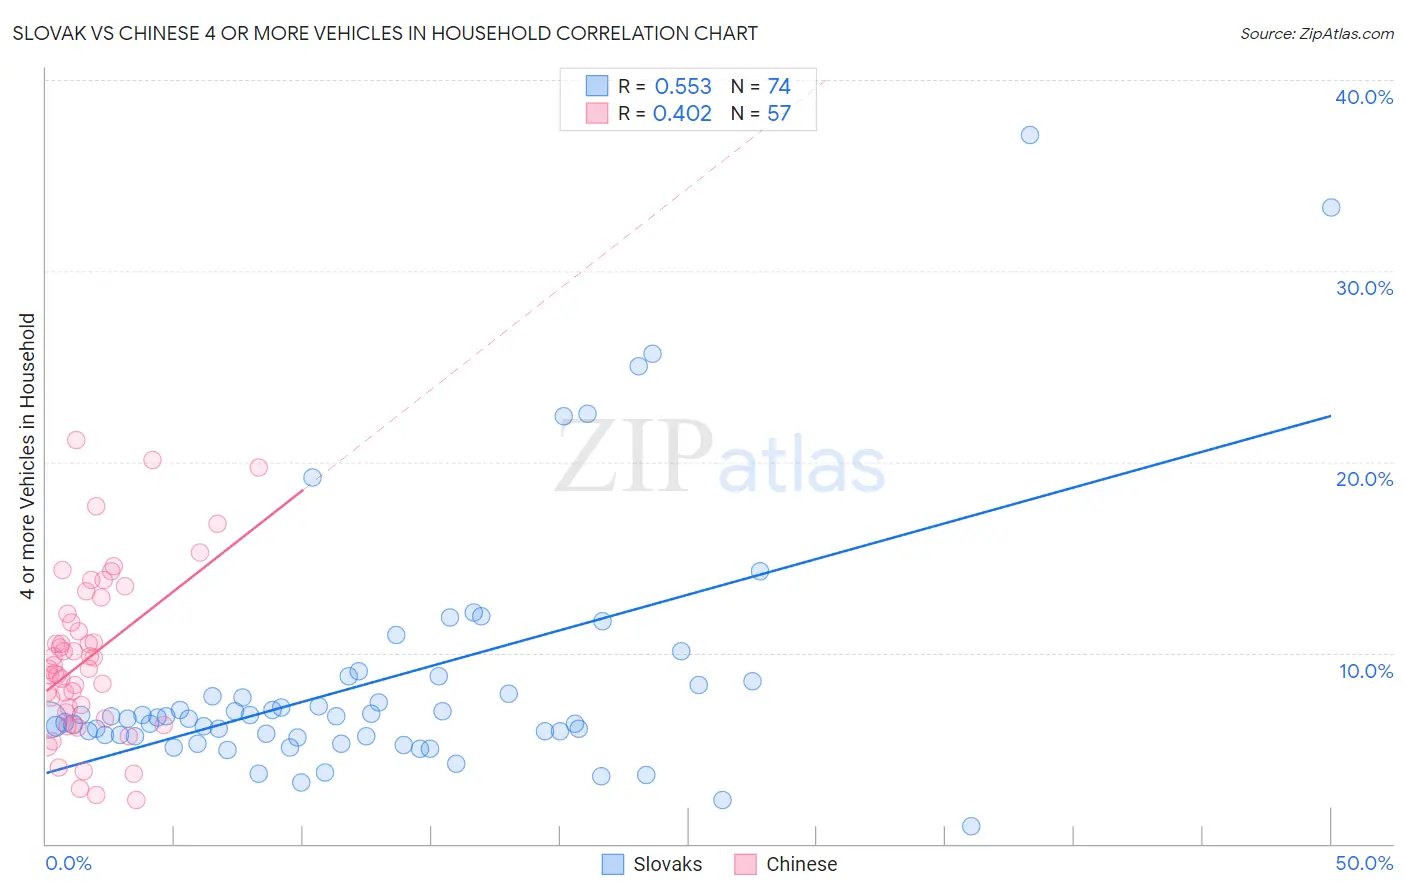 Slovak vs Chinese 4 or more Vehicles in Household